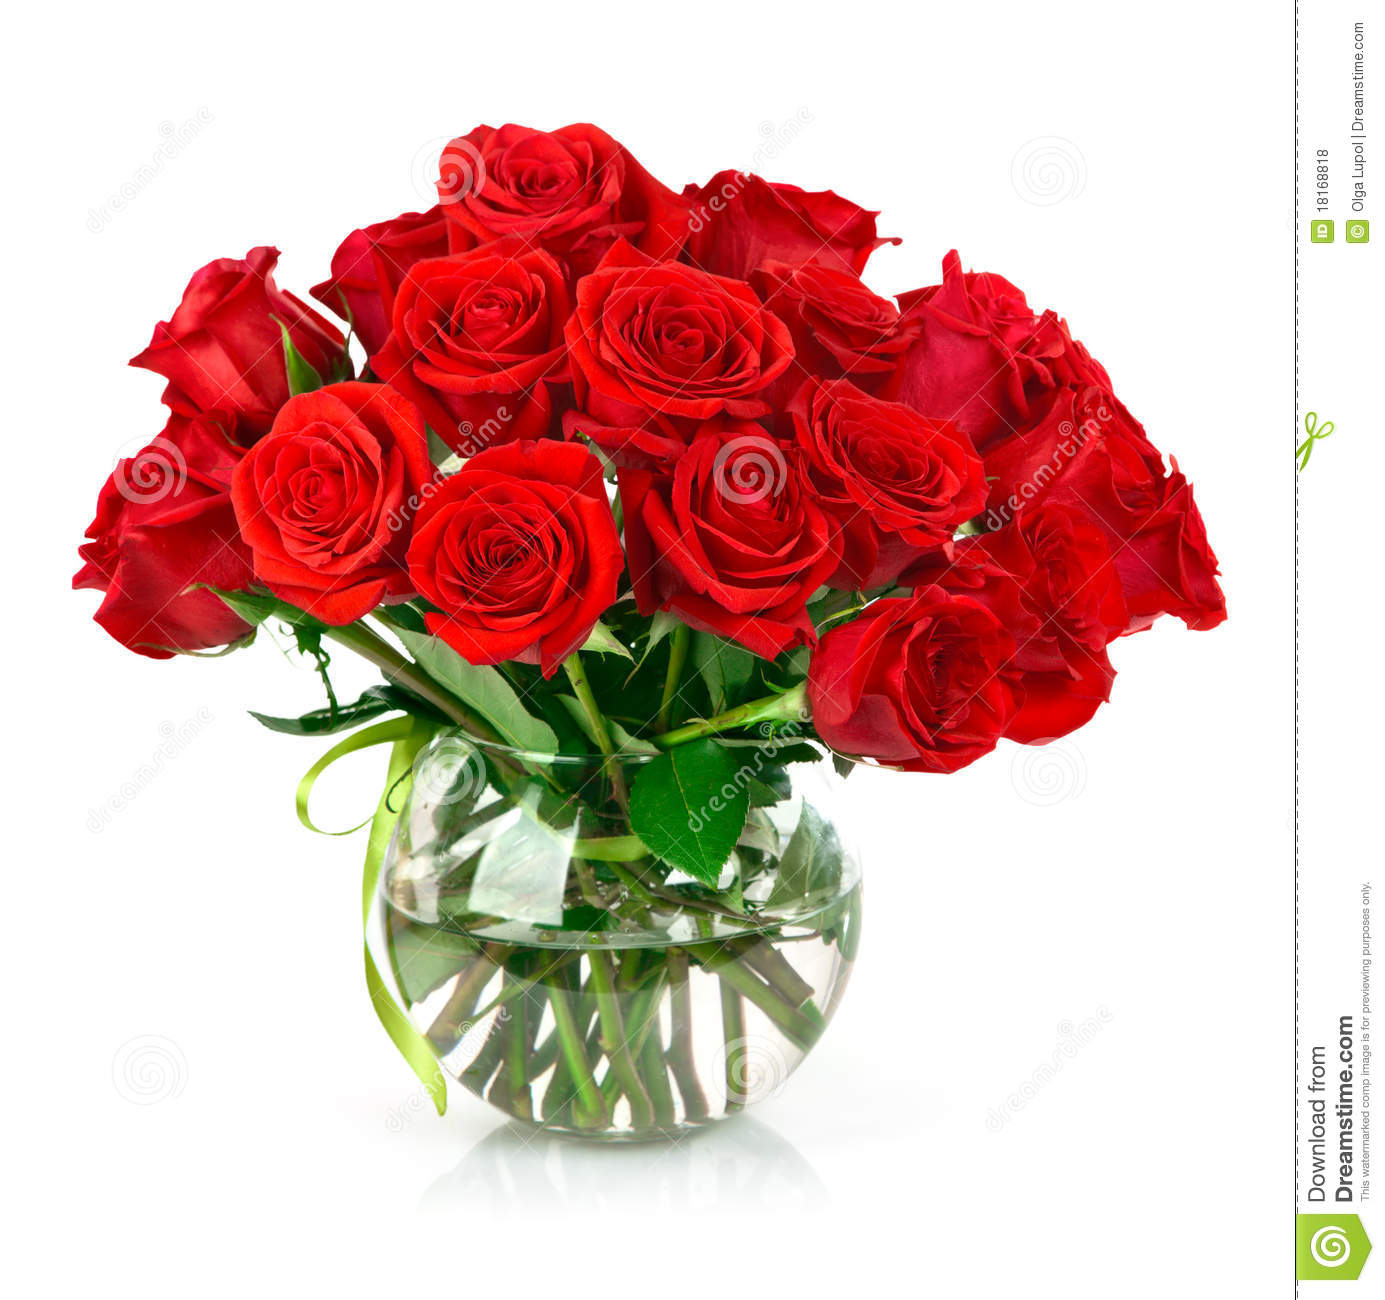 Dreamstime Combouquet Of Red Roses Royalty Free Stock Photos   Image